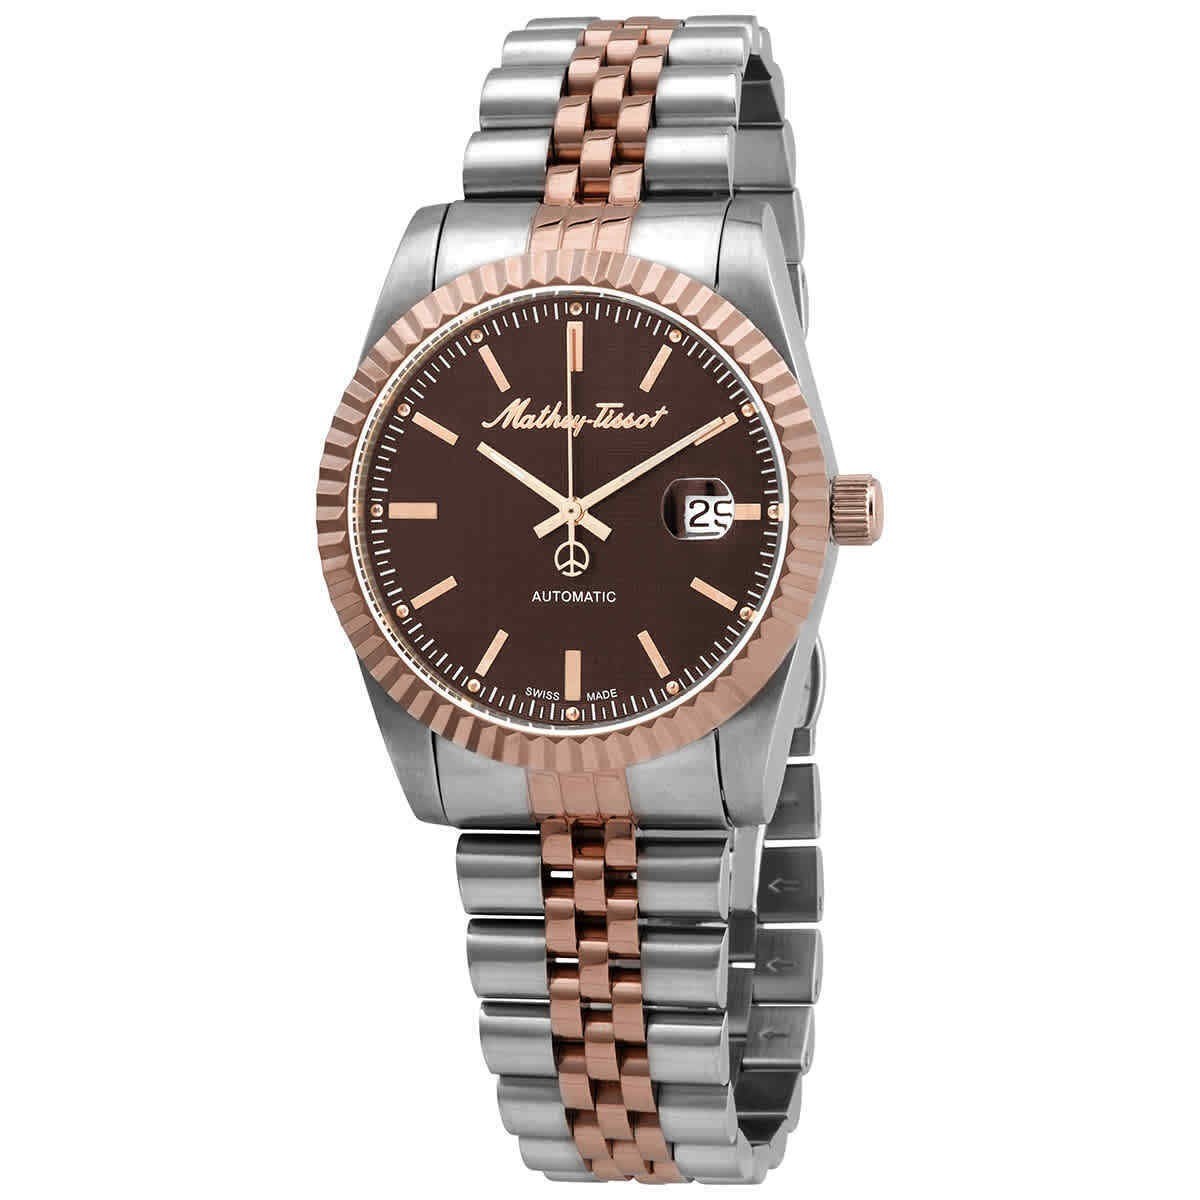 Mathey-Tissot Mathy III Automatic Two Tone Stainless Steel Brown Dial H1810ATRN Men's Watch